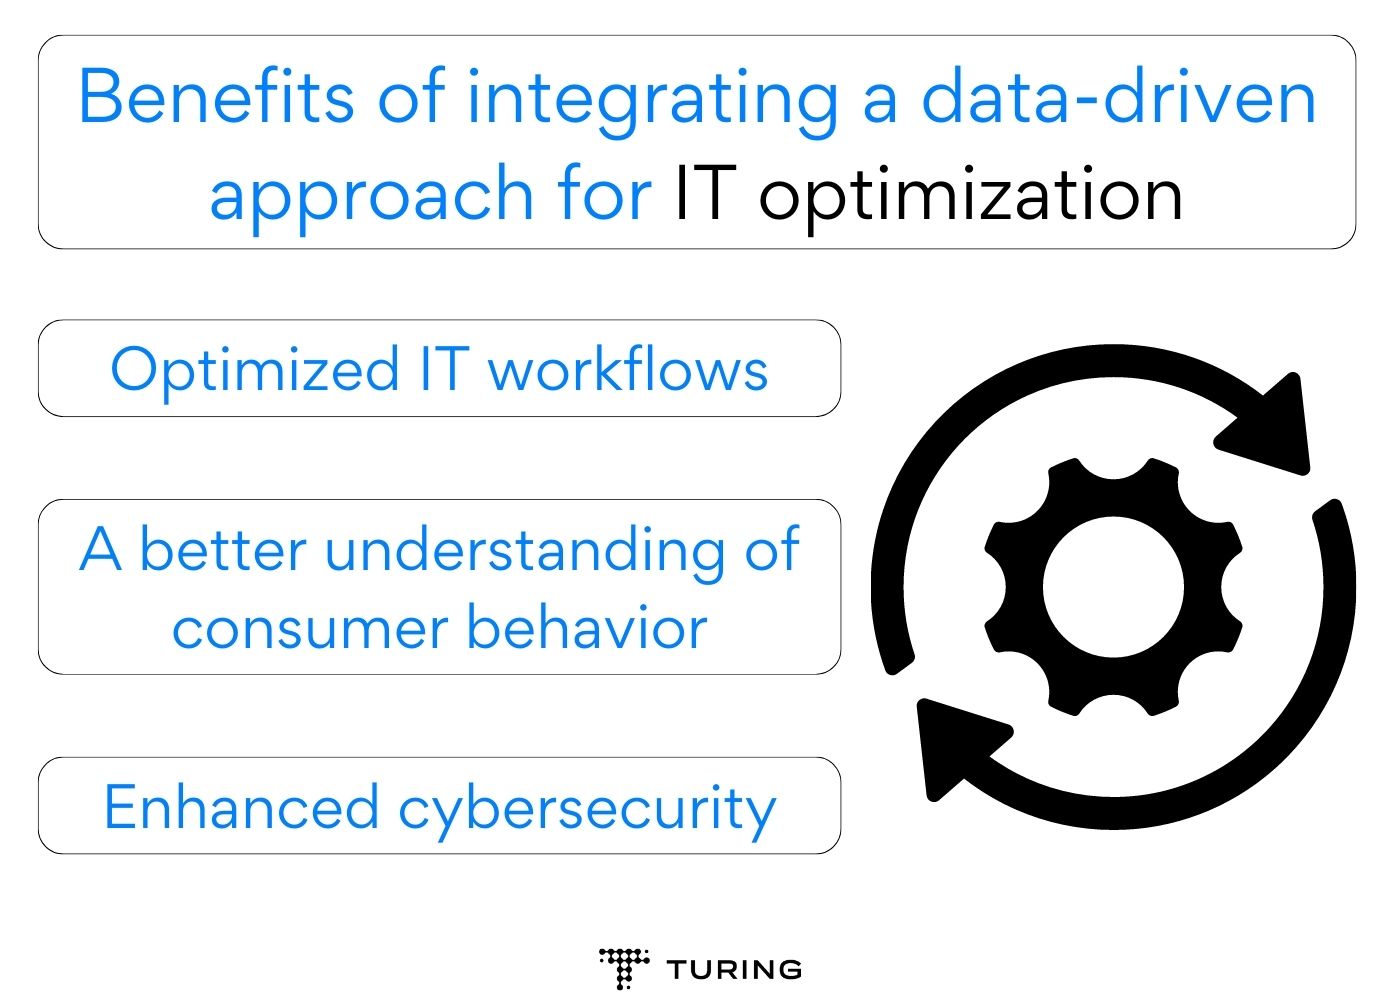 Benefits of integrating a data-driven approach for IT optimization